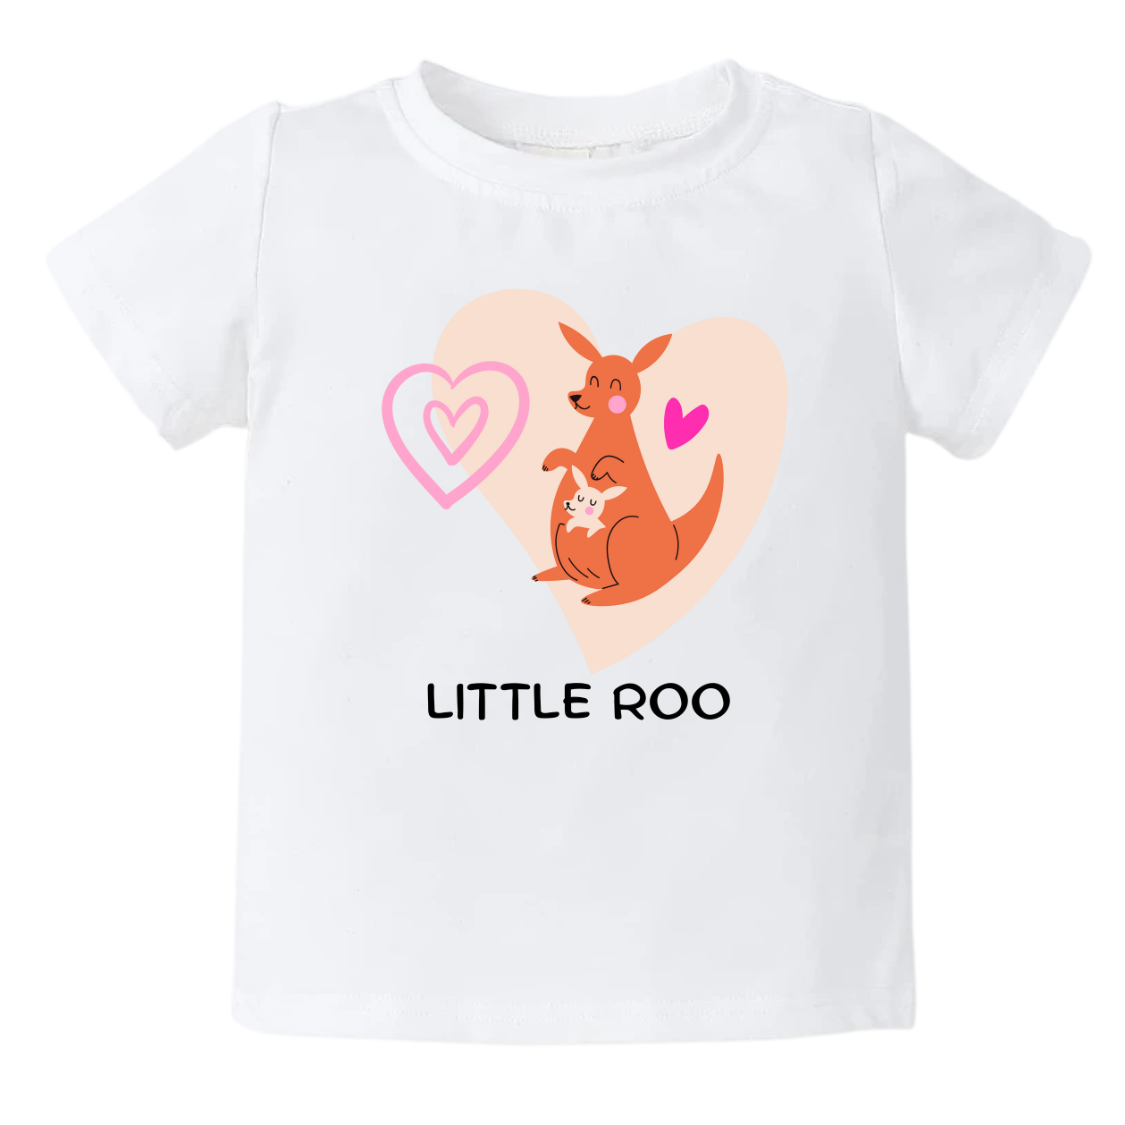 Little Roo Baby Onesie® Kangaroo Cute Gift for Baby Outfit for Baby Shower Gift